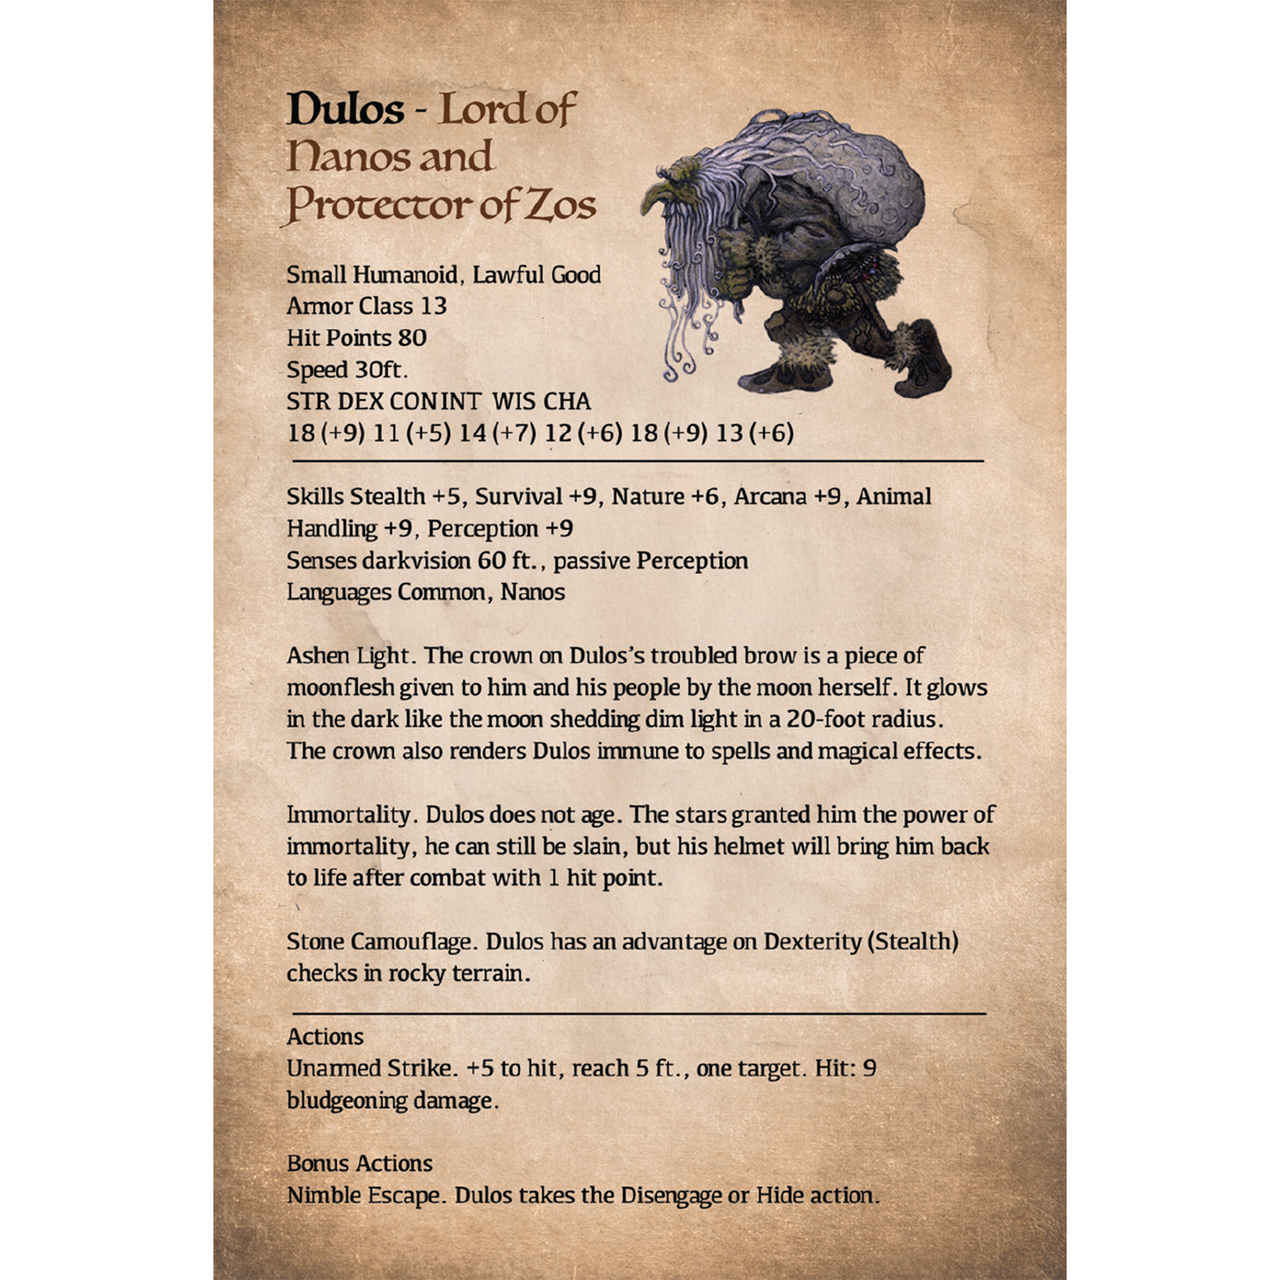 Astromythos: Lair of the Spider Lord Preview (PDF)